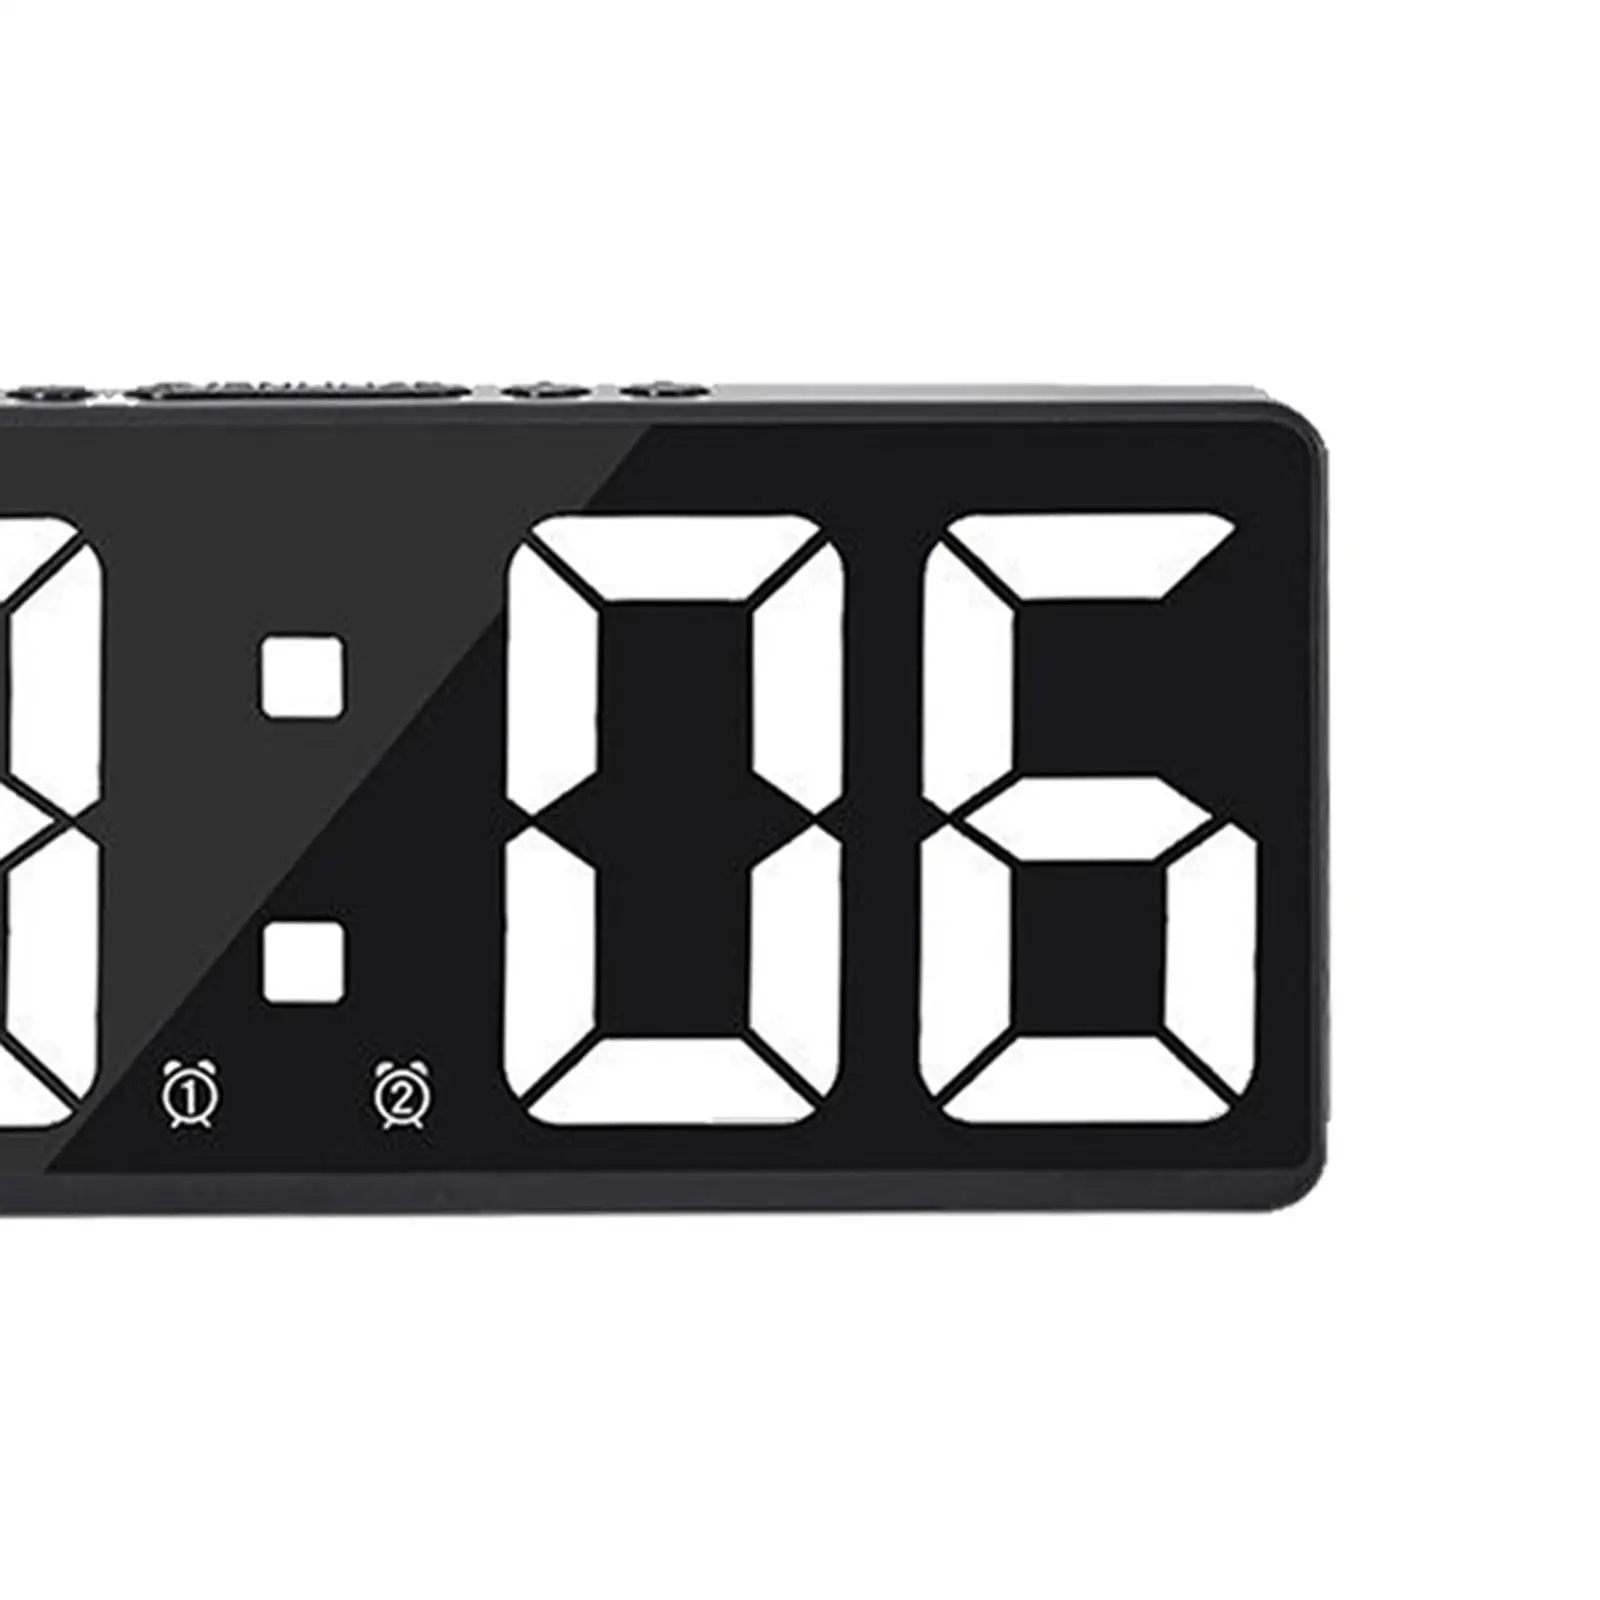 Large Number Alarm Clock Temperature Electronic USB Charger Table Large LED